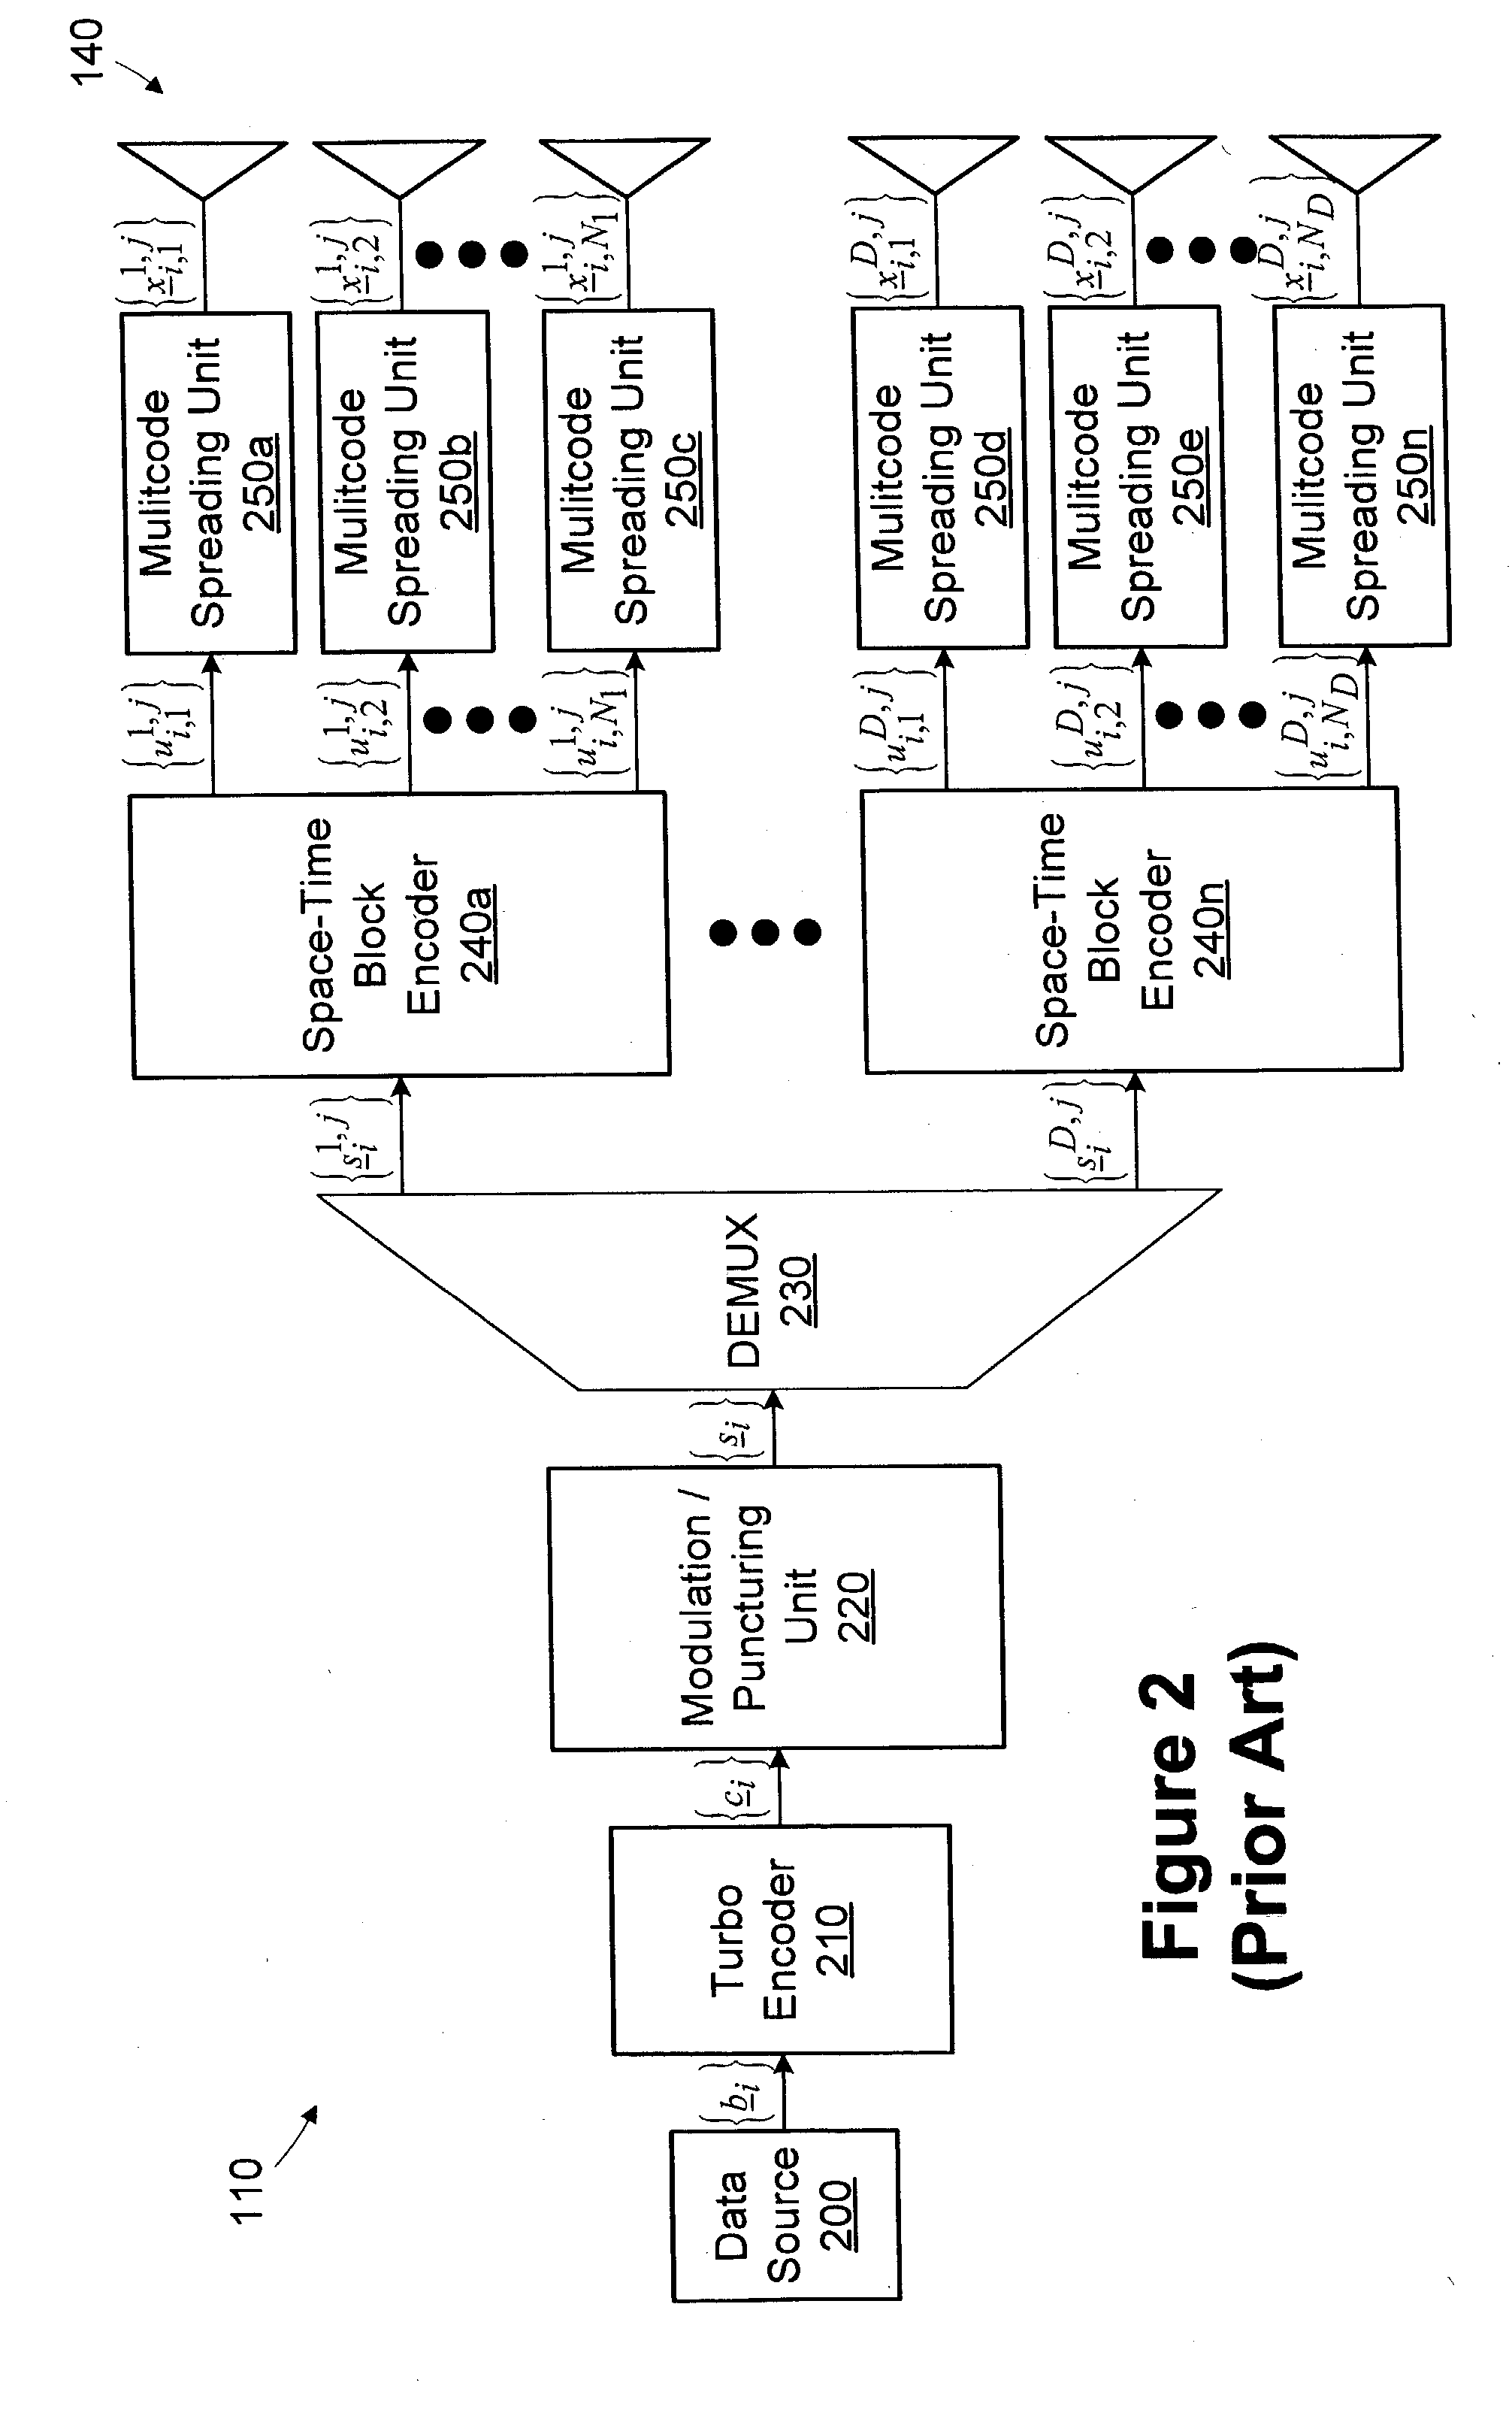 Array processing using an aggregate channel matrix generated using a block code structure